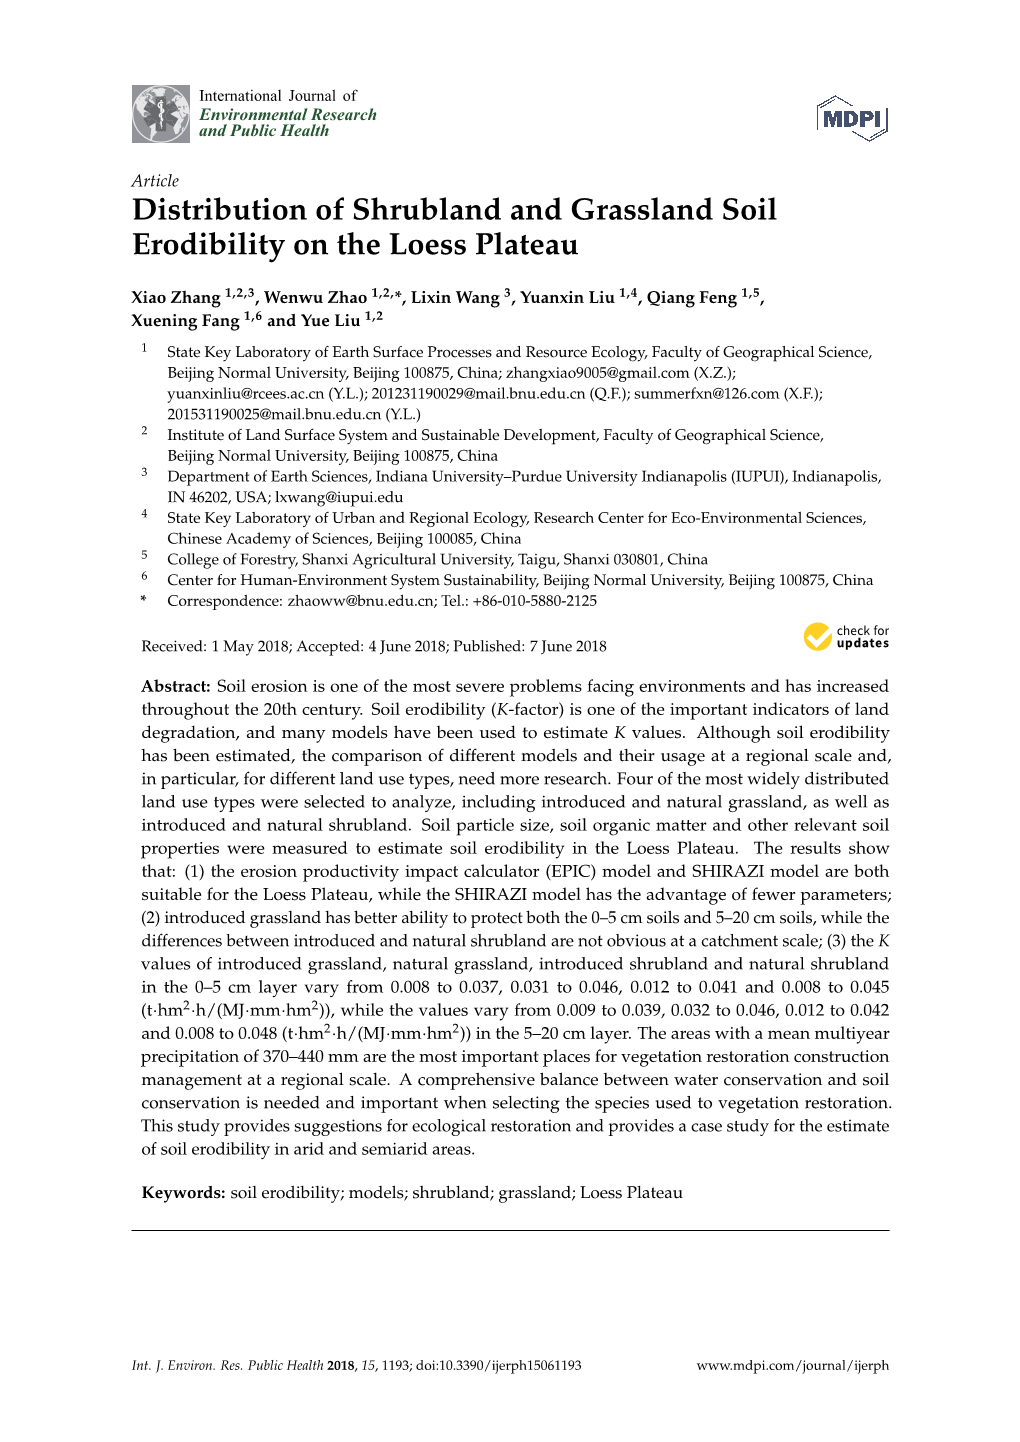 Distribution of Shrubland and Grassland Soil Erodibility on the Loess Plateau